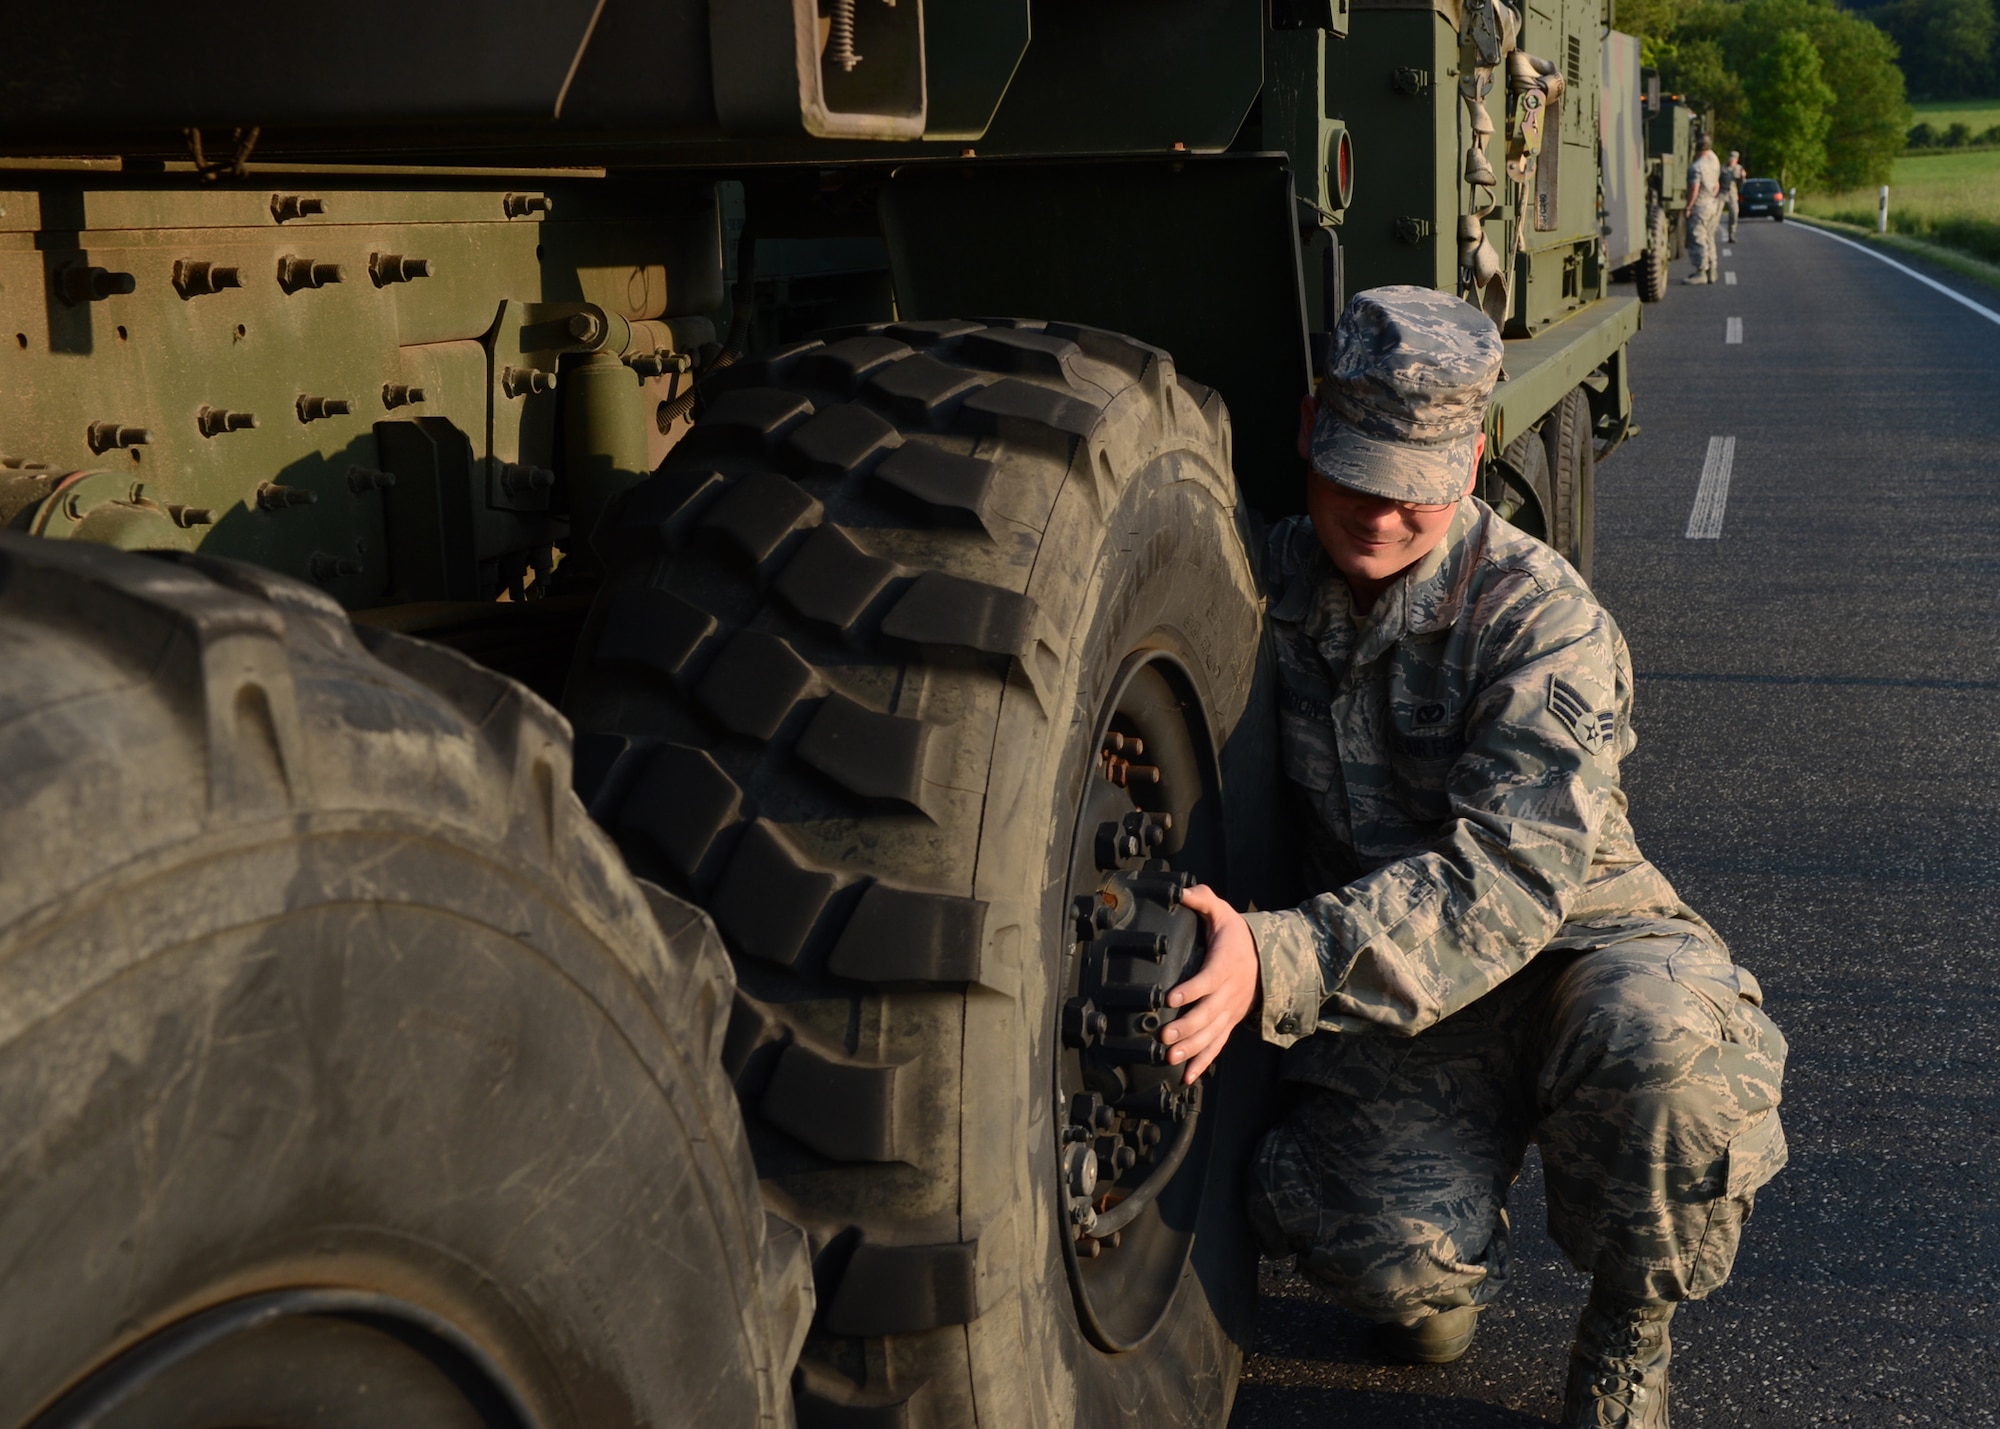 U.S. Air Force Senior Airman Robert Gordon, 606th Air Control Squadron power production apprentice, conducts a hot brake check on route to Powidz Air Base, Poland, June 3, 2014. There were three groups of vehicles that left Spangdahlem Air Base, Germany, convoying nearly 90 U.S. Airmen to Poland. The vehicles transported equipment to set up air-to-ground communication in support of Exercise EAGLE TALON and U.S. Aviation Detachment Rotation 14-3, both exercises that increase NATO interoperability. (U.S. Air Force photo by Airman 1st Class Kyle Gese/Released)